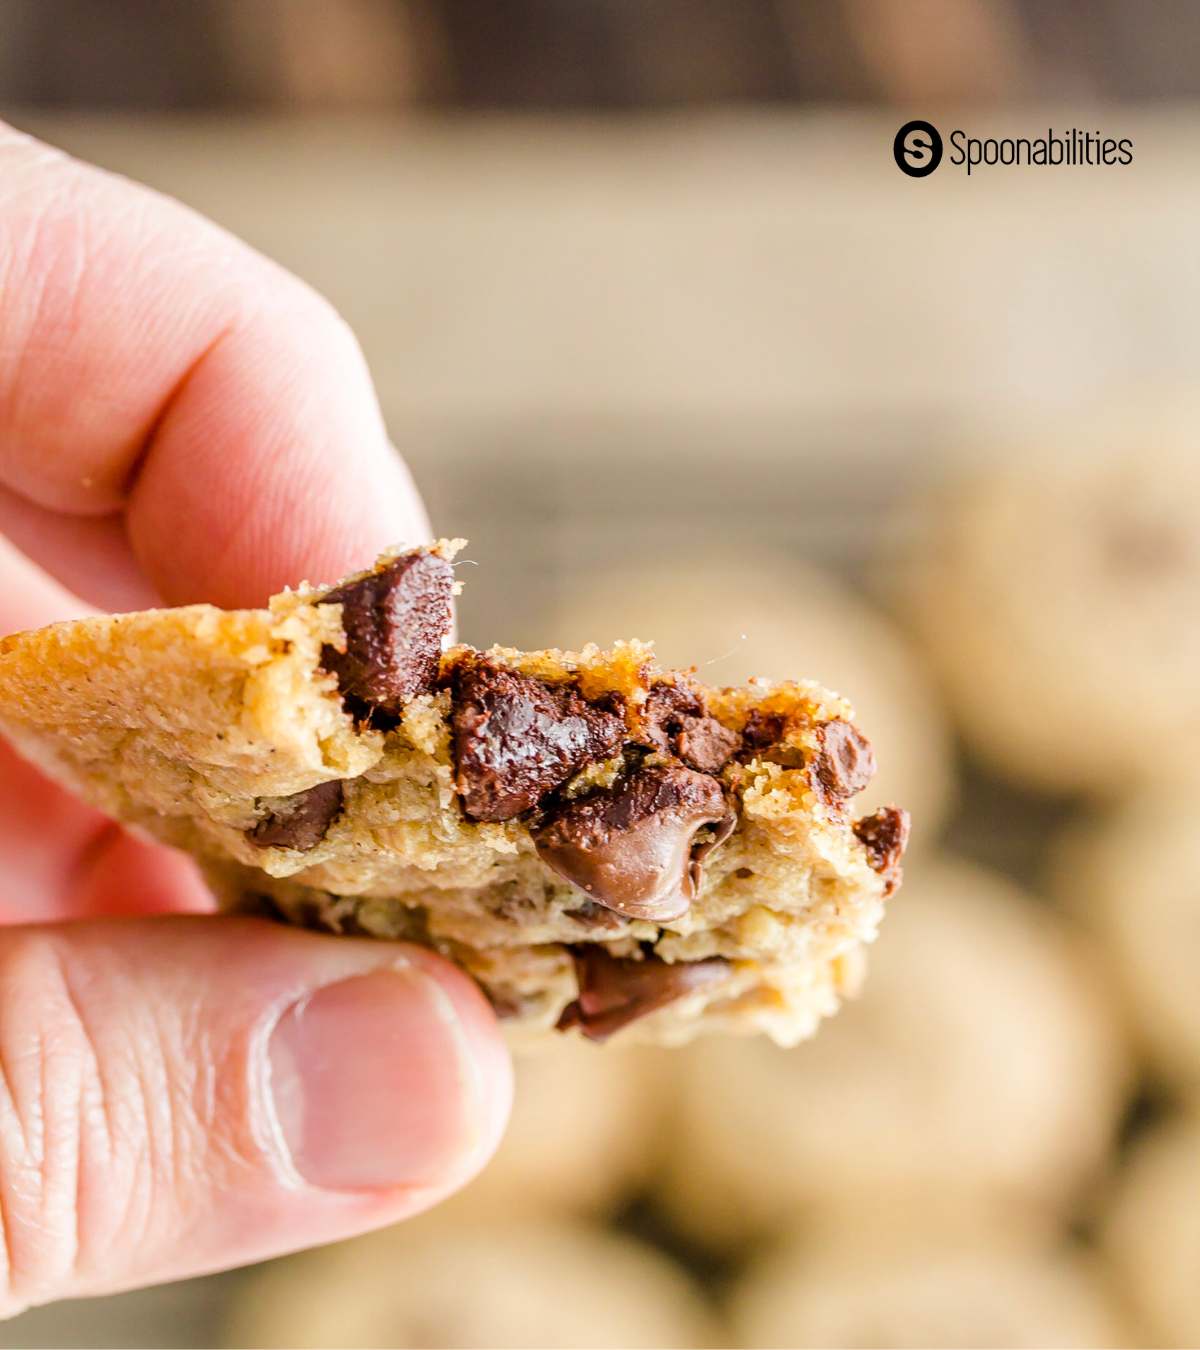 Chocolate morsels showing from inside choco chip cookie half